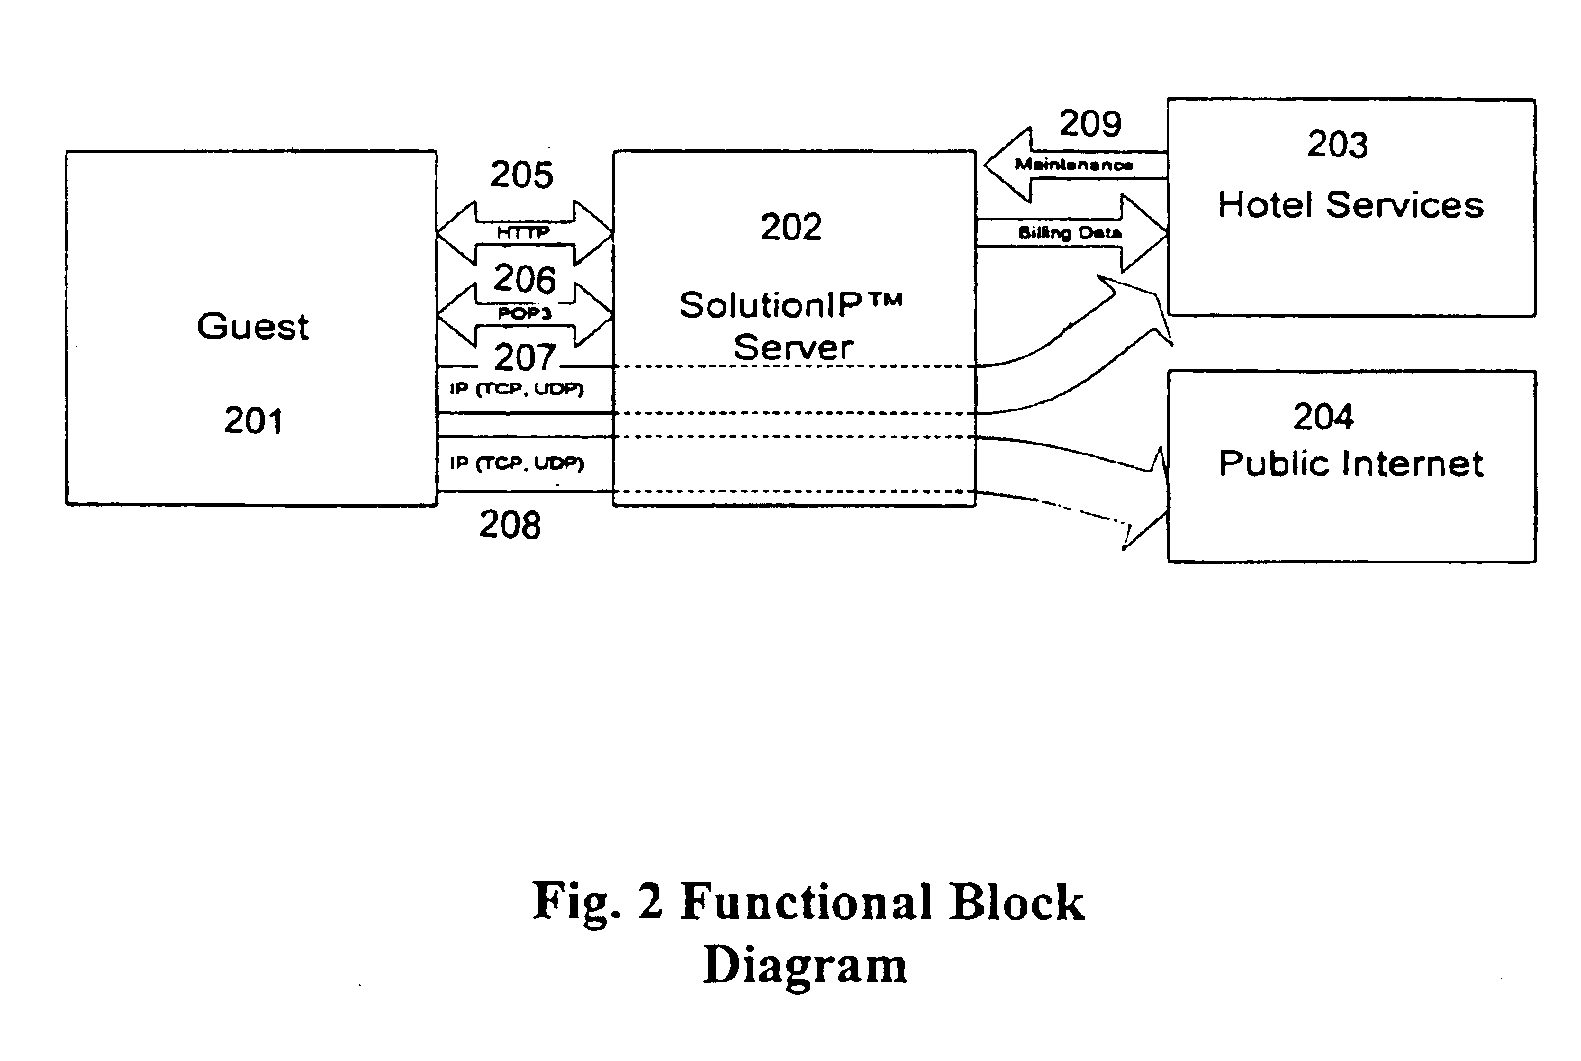 System for reconfiguring and registering a new IP address for a computer to access a different network without user intervention